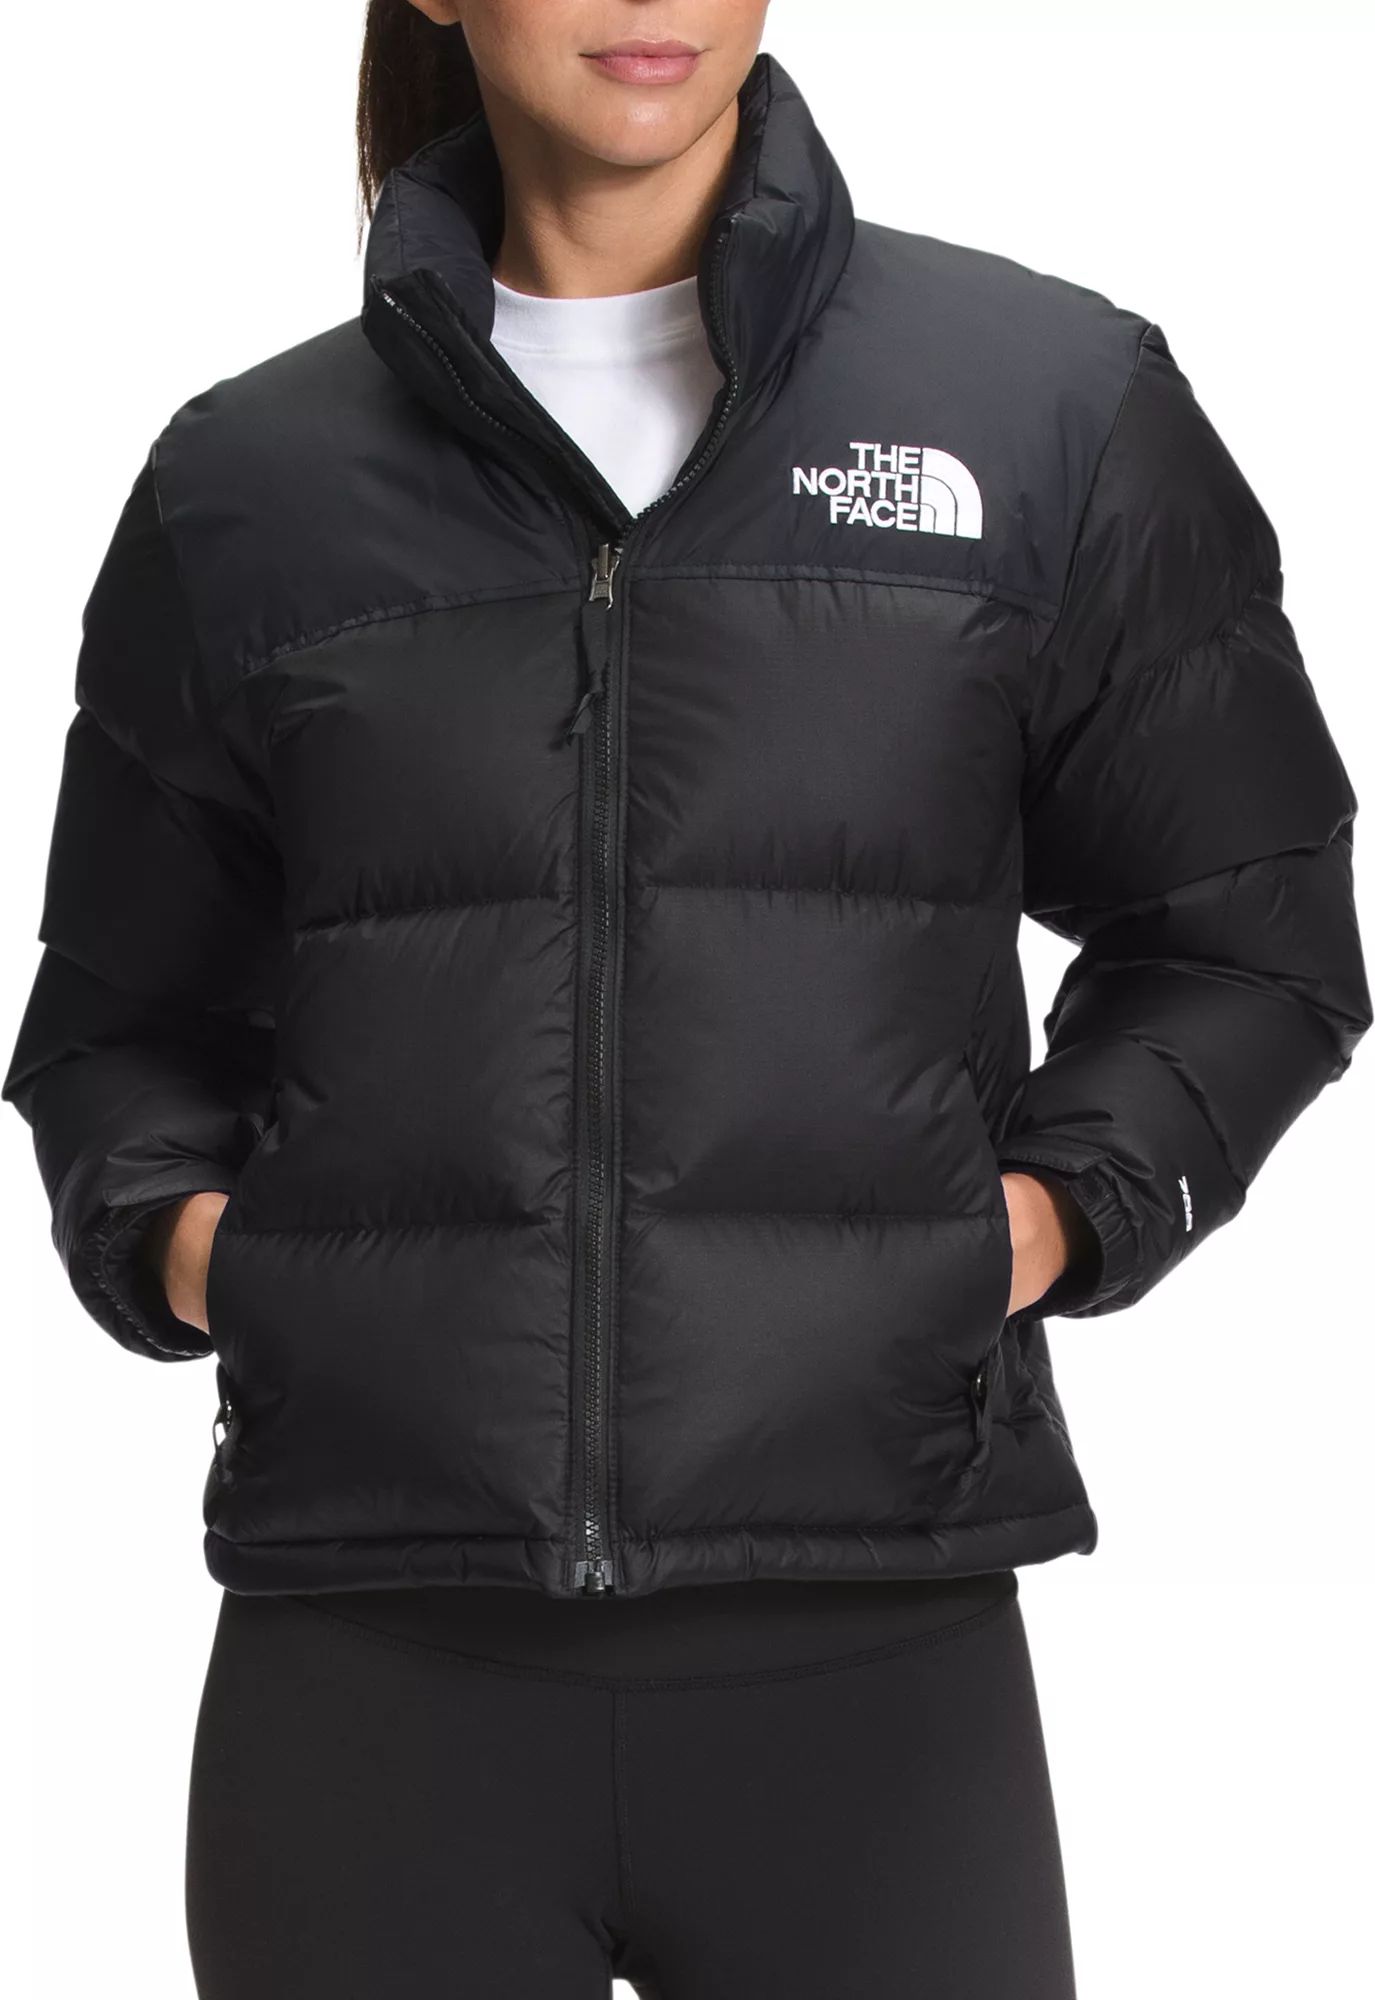 The North Face Women's 1996 Retro Nuptse Down Jacket, Small, Black | Dick's Sporting Goods